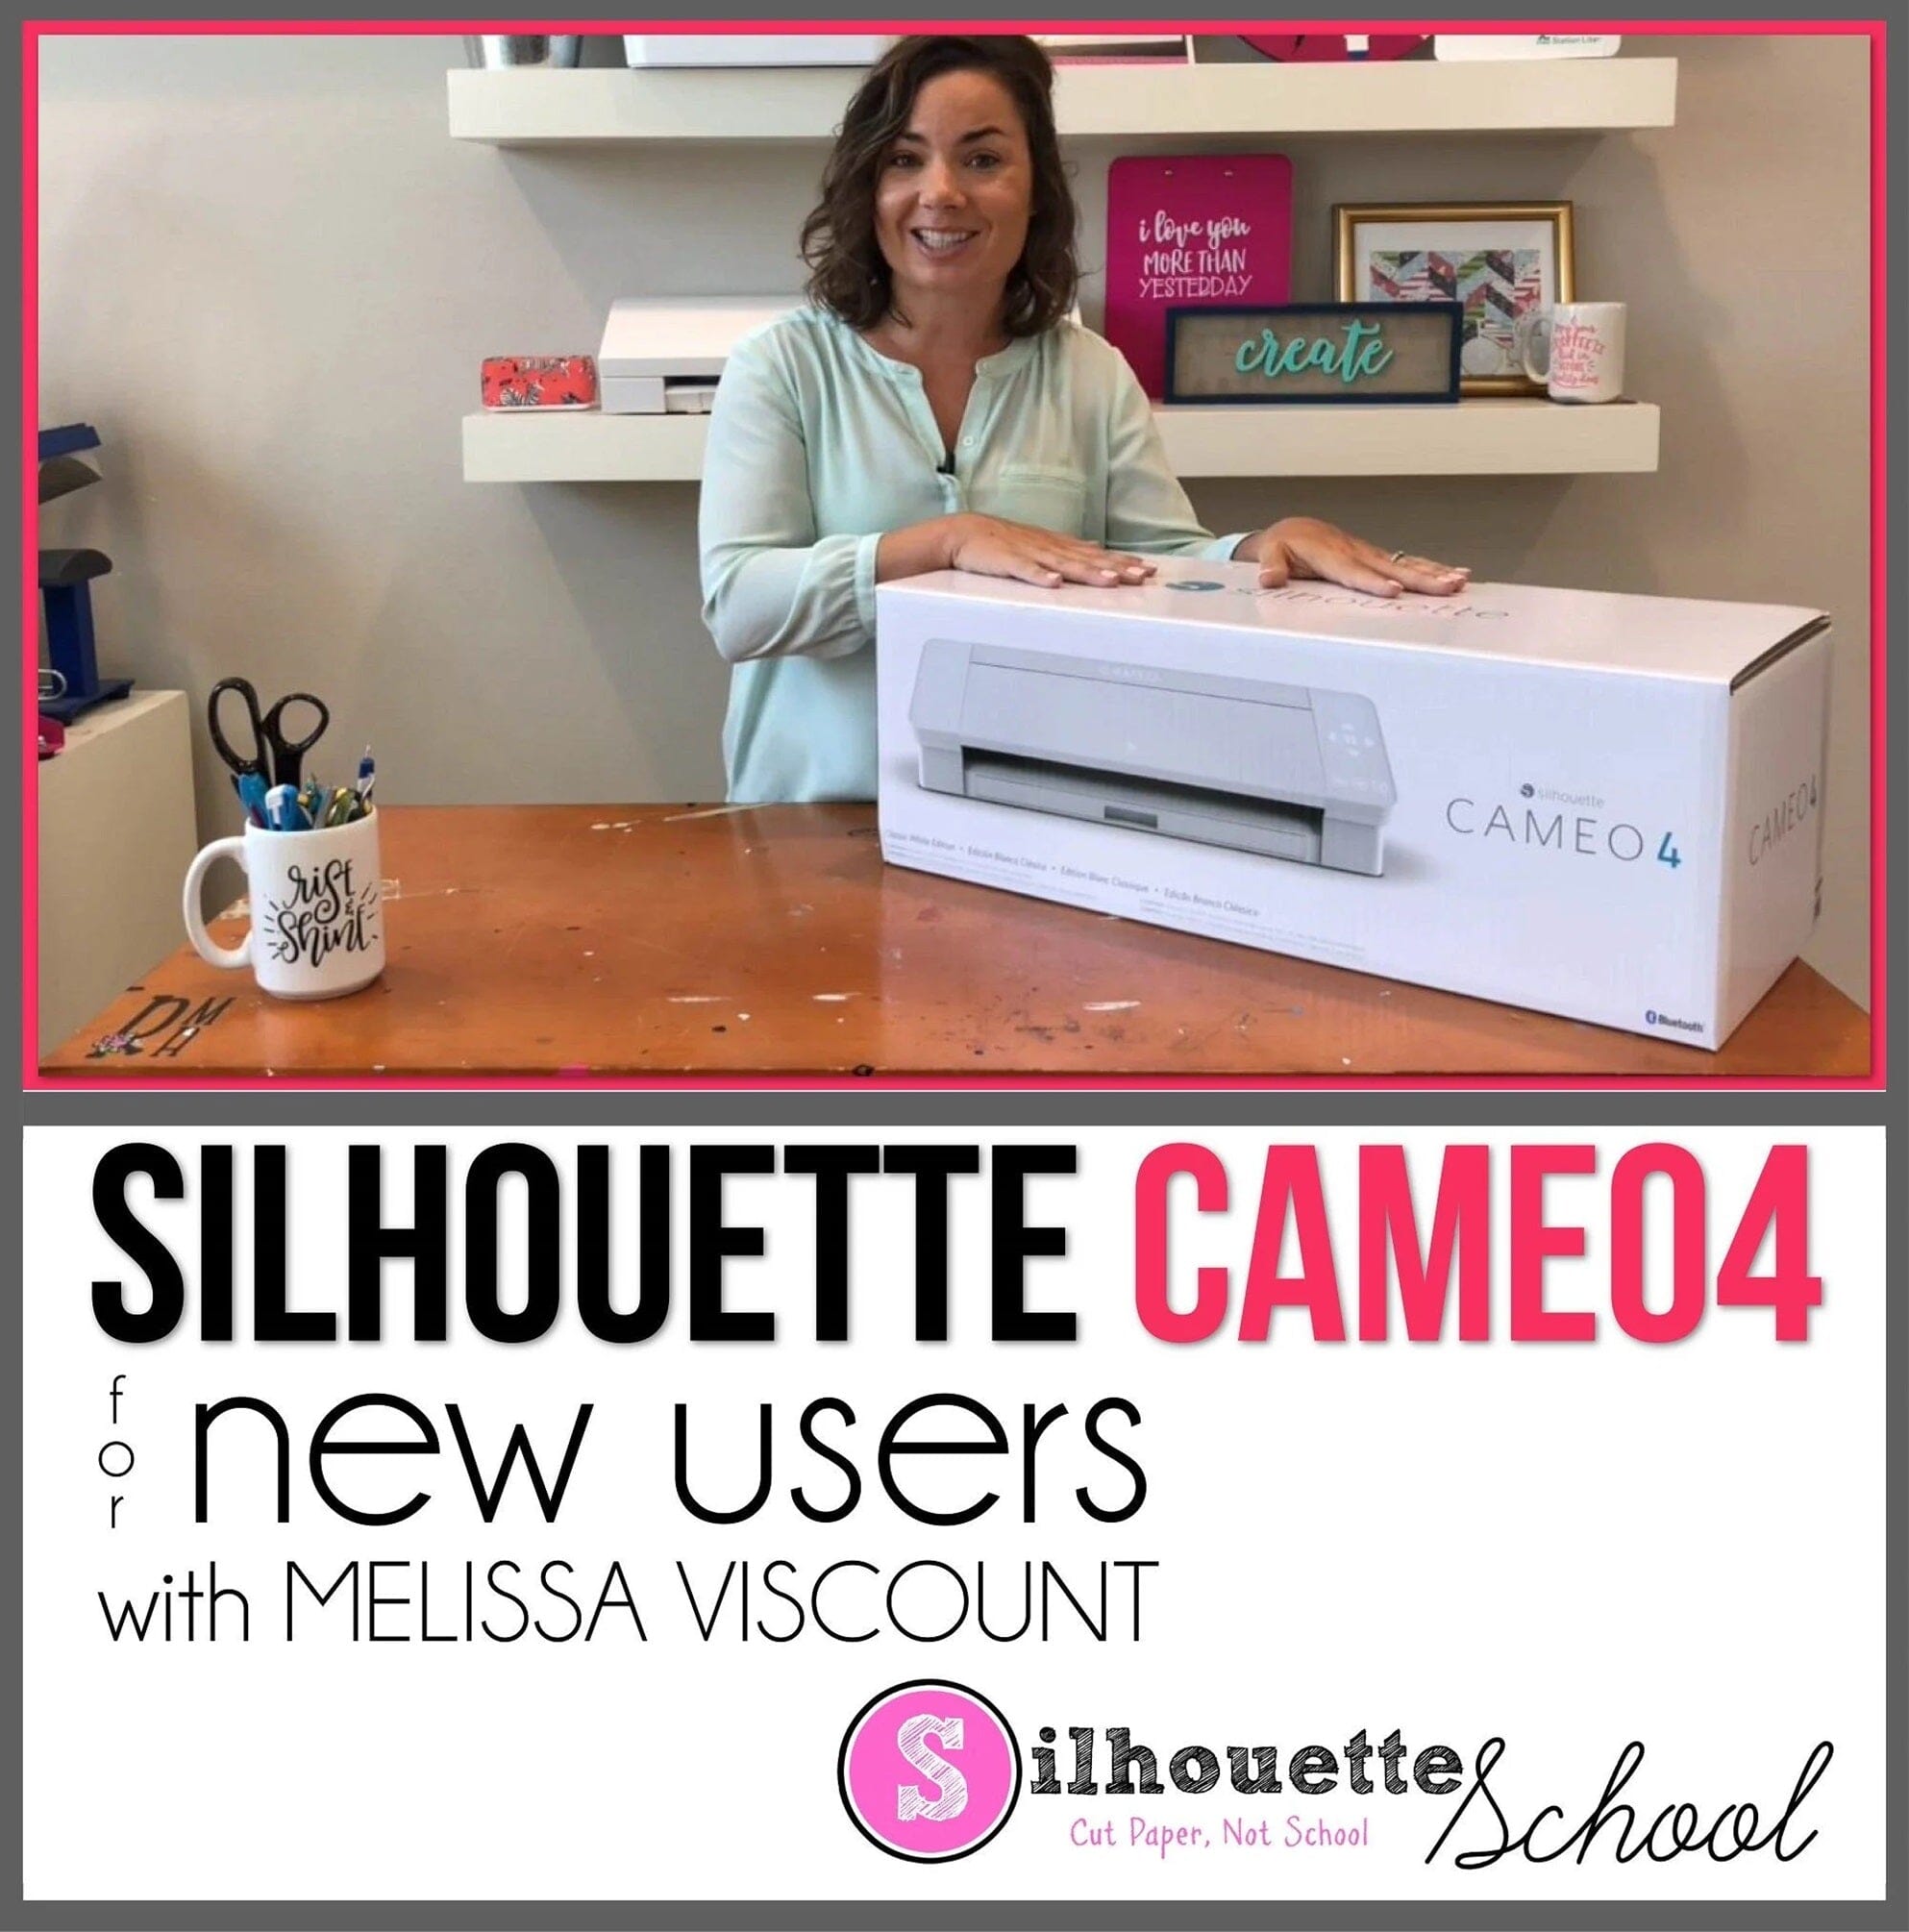 Silhouette CAMEO 4 Plus Tutorial: How Print and Cut on 15 Cutter